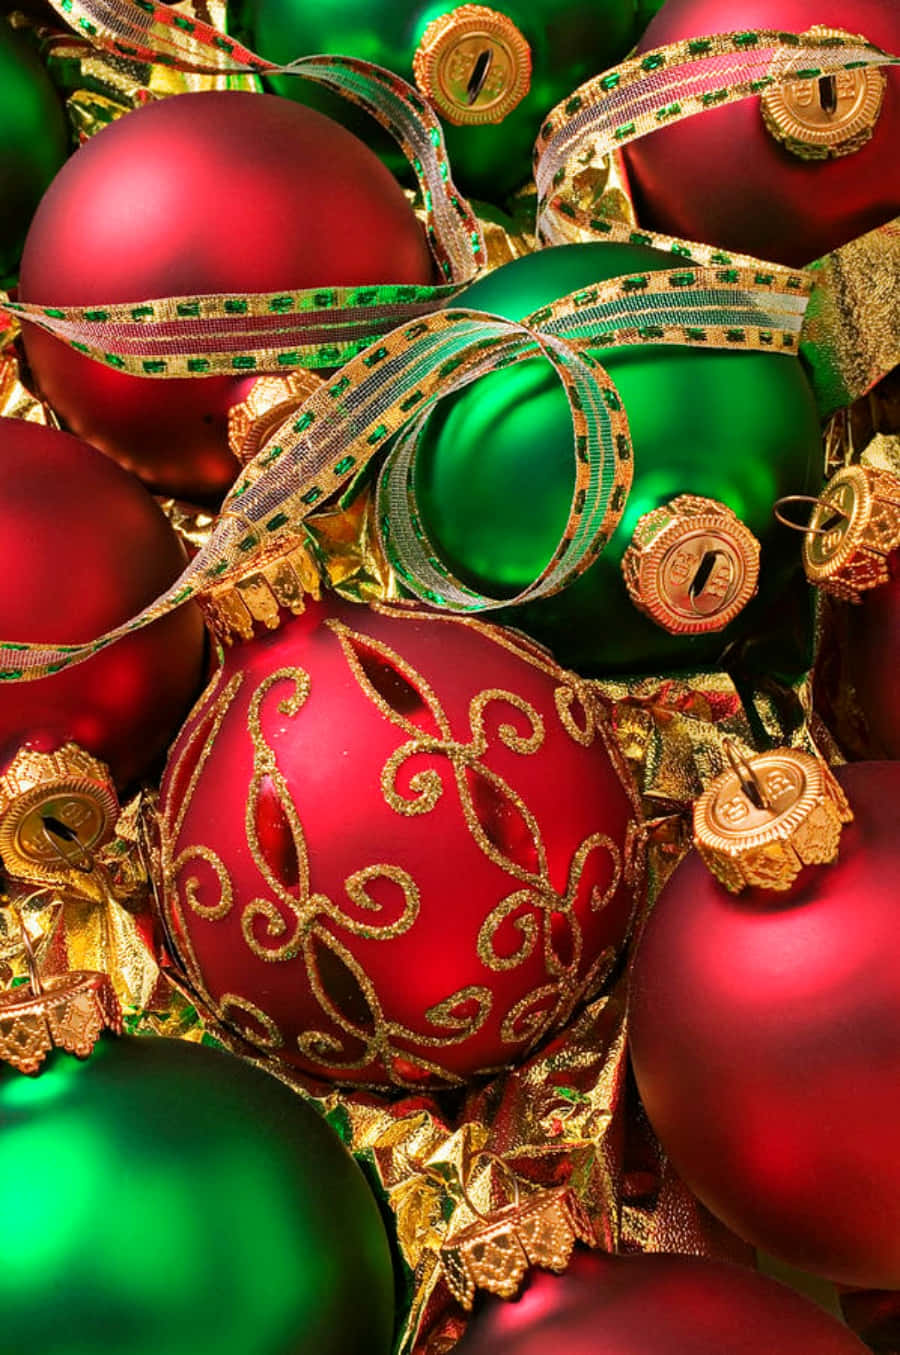 Enjoy a traditional red and green holiday with these festive decorations! Wallpaper